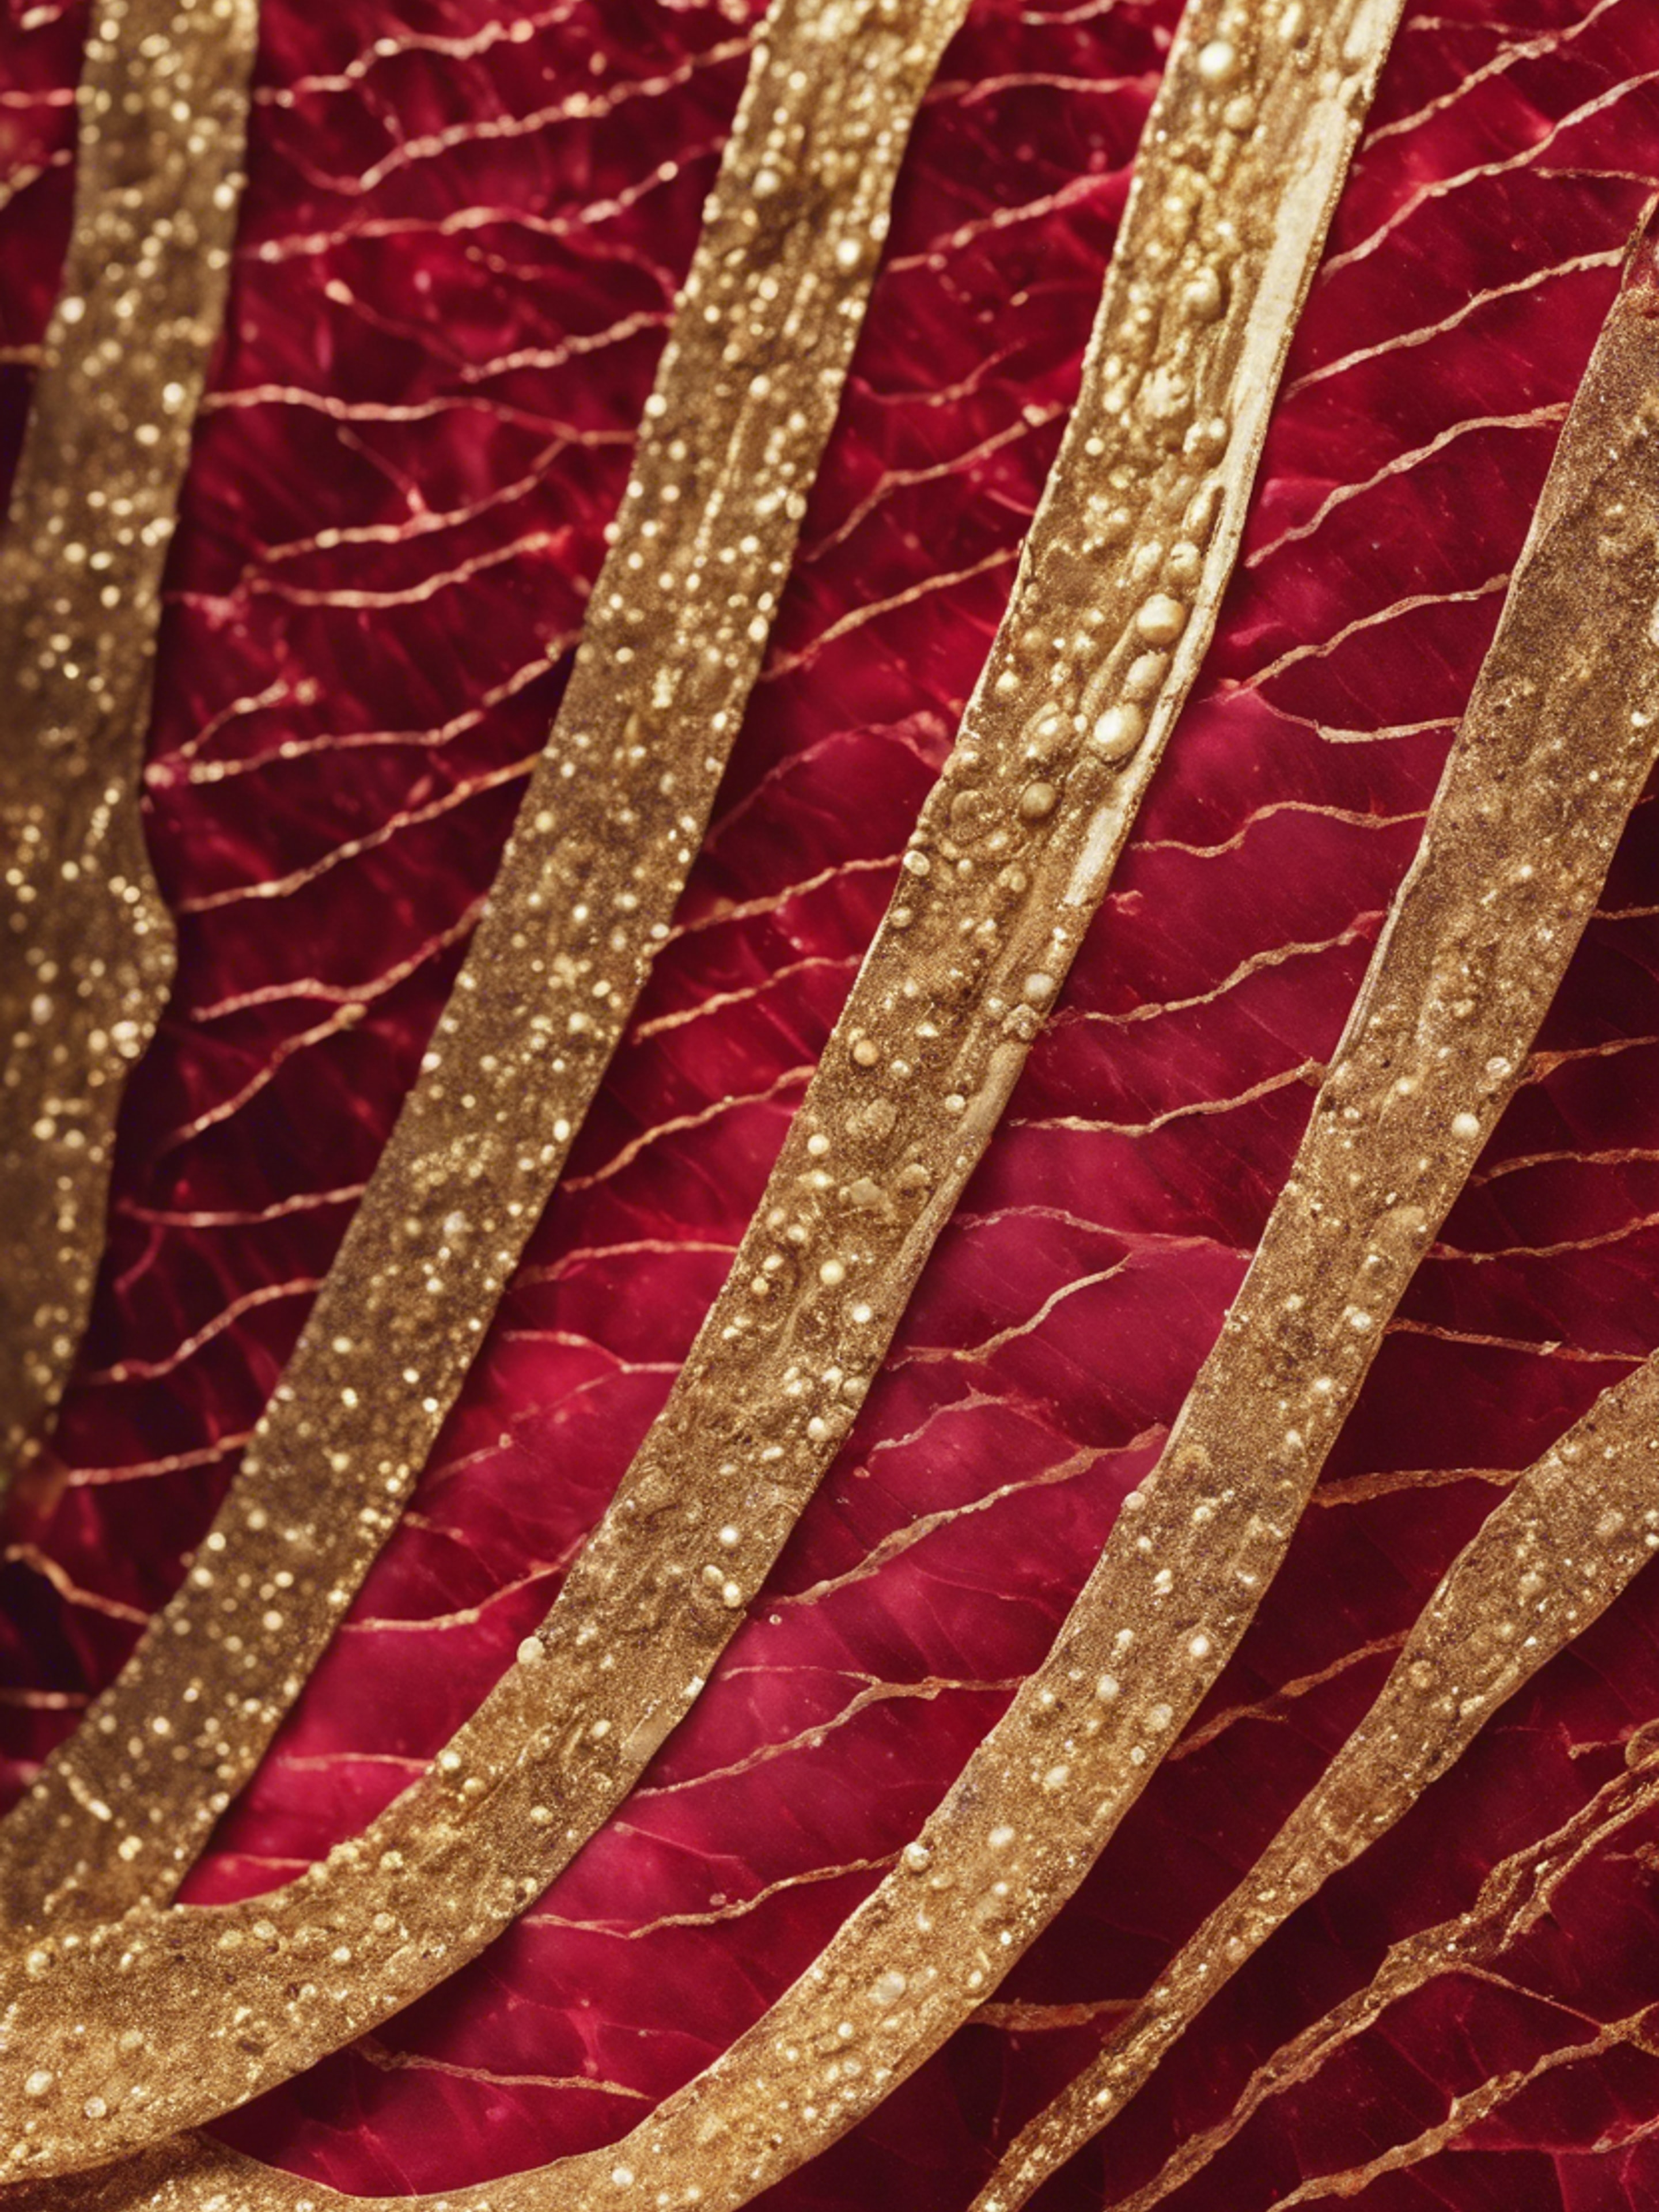 A rich mosaic of cerise red velvet interlaced with veins of shimmering gold.壁紙[dcbd46e138d24d6da9a0]